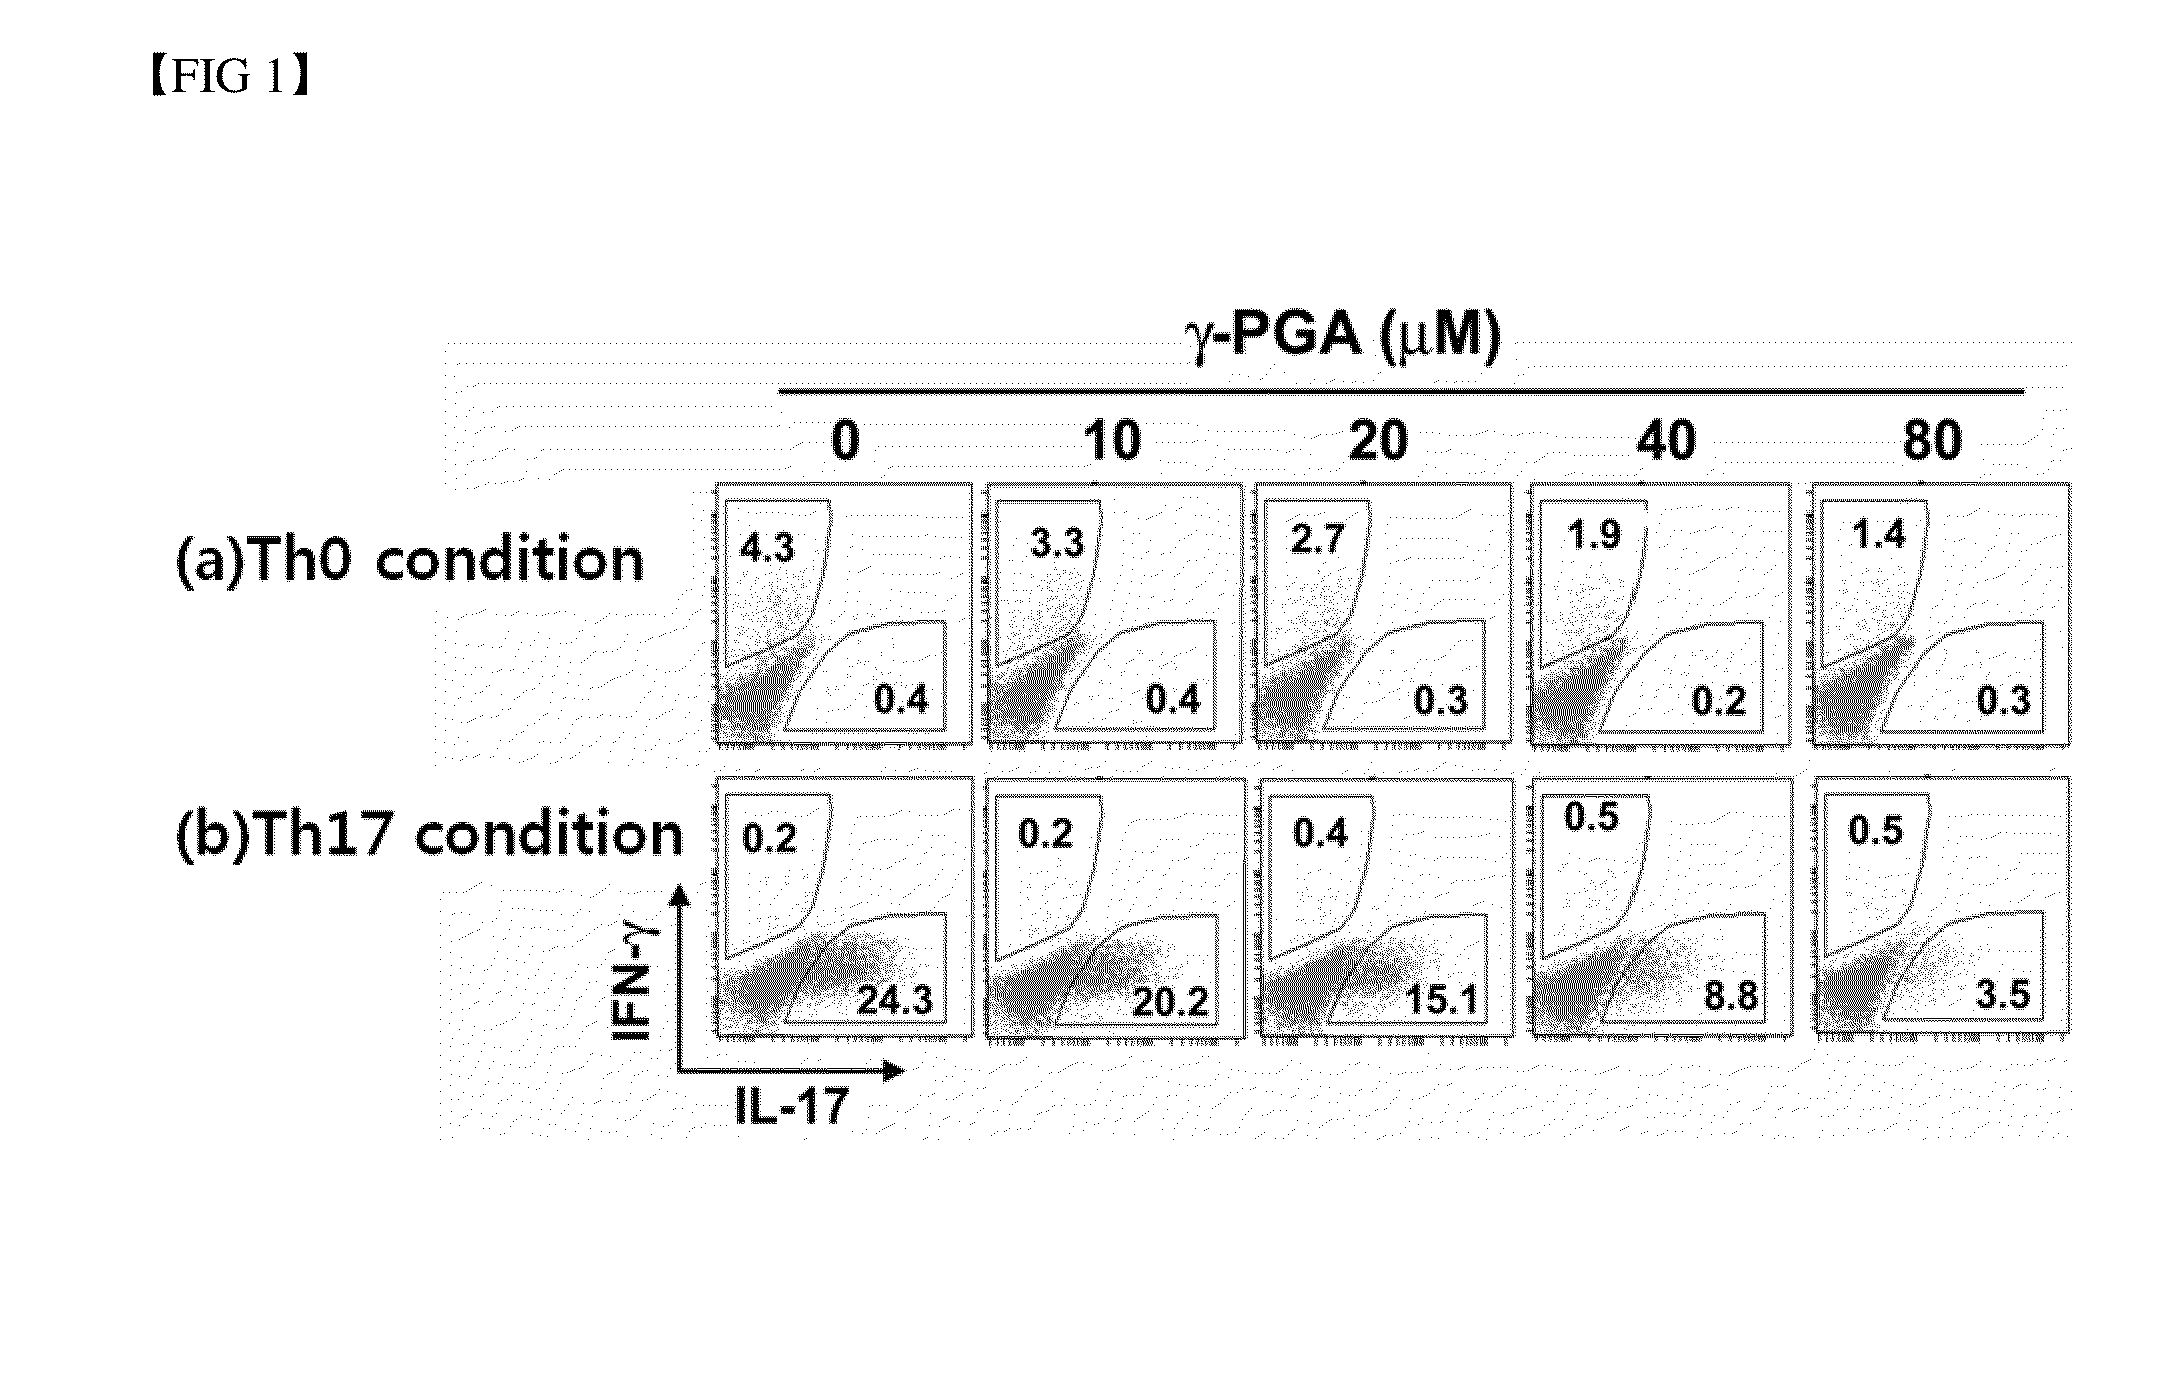 Pharmaceutical composition for preventing or treating th17-mediated disease comprising poly-gamma-glutamic acid